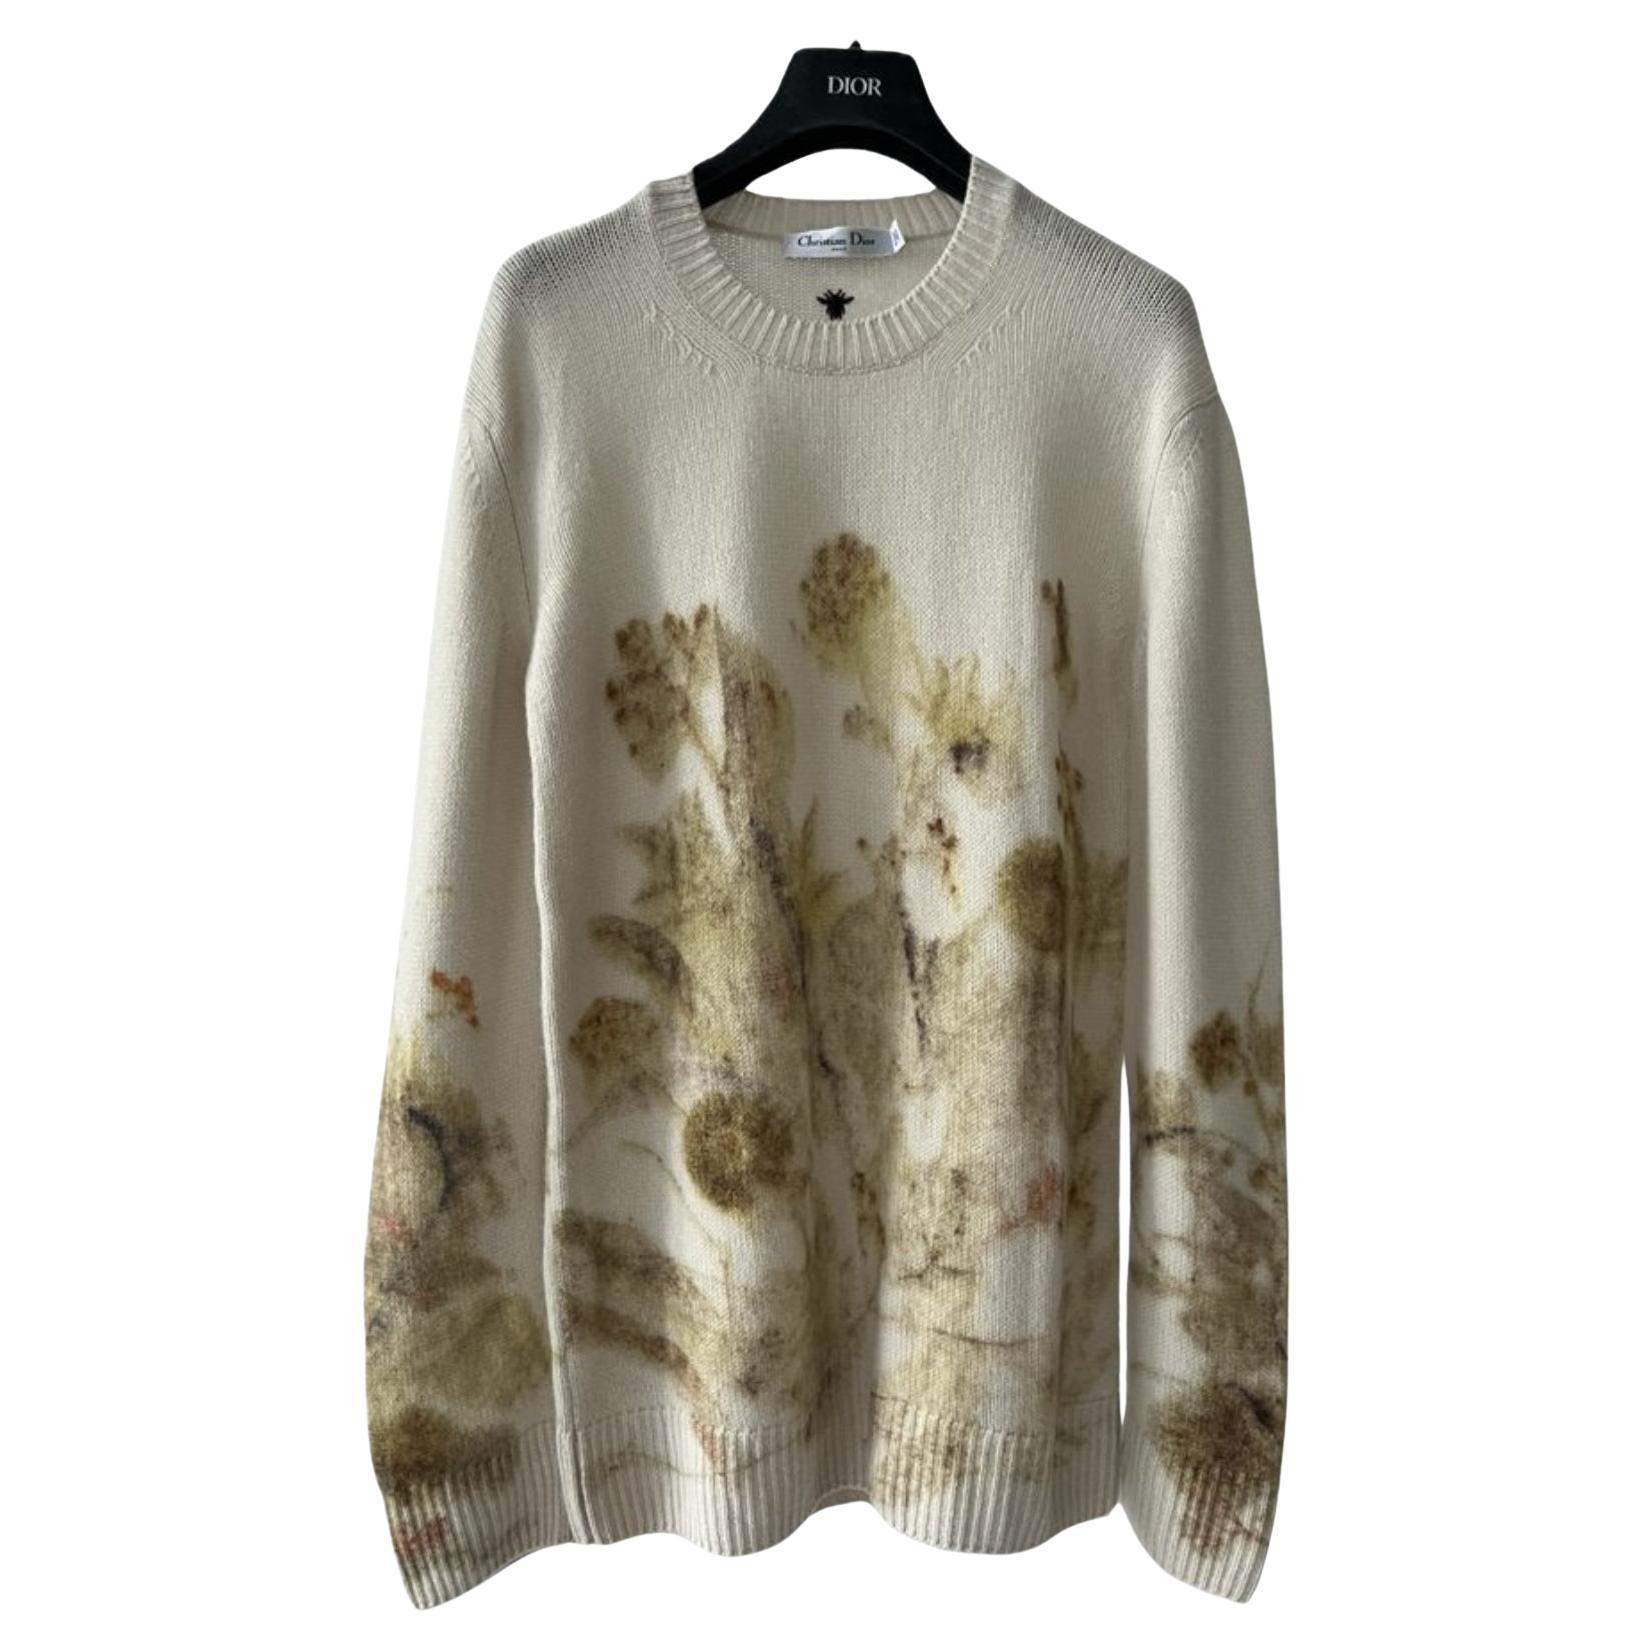 Dior Cashmere Jumper Hand Painted For Sale